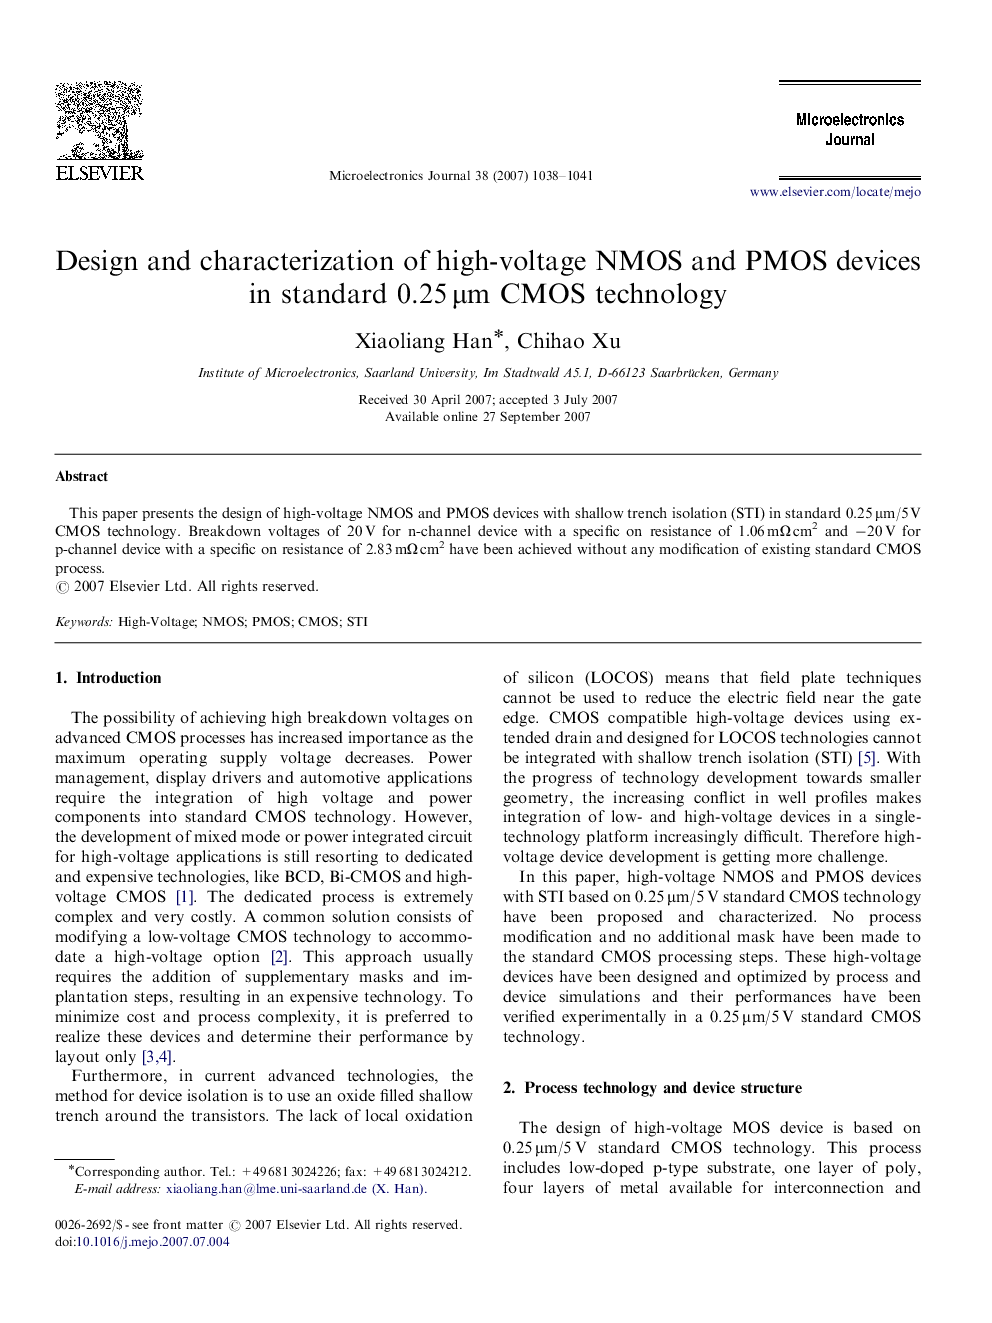 Design and characterization of high-voltage NMOS and PMOS devices in standard 0.25 μm CMOS technology